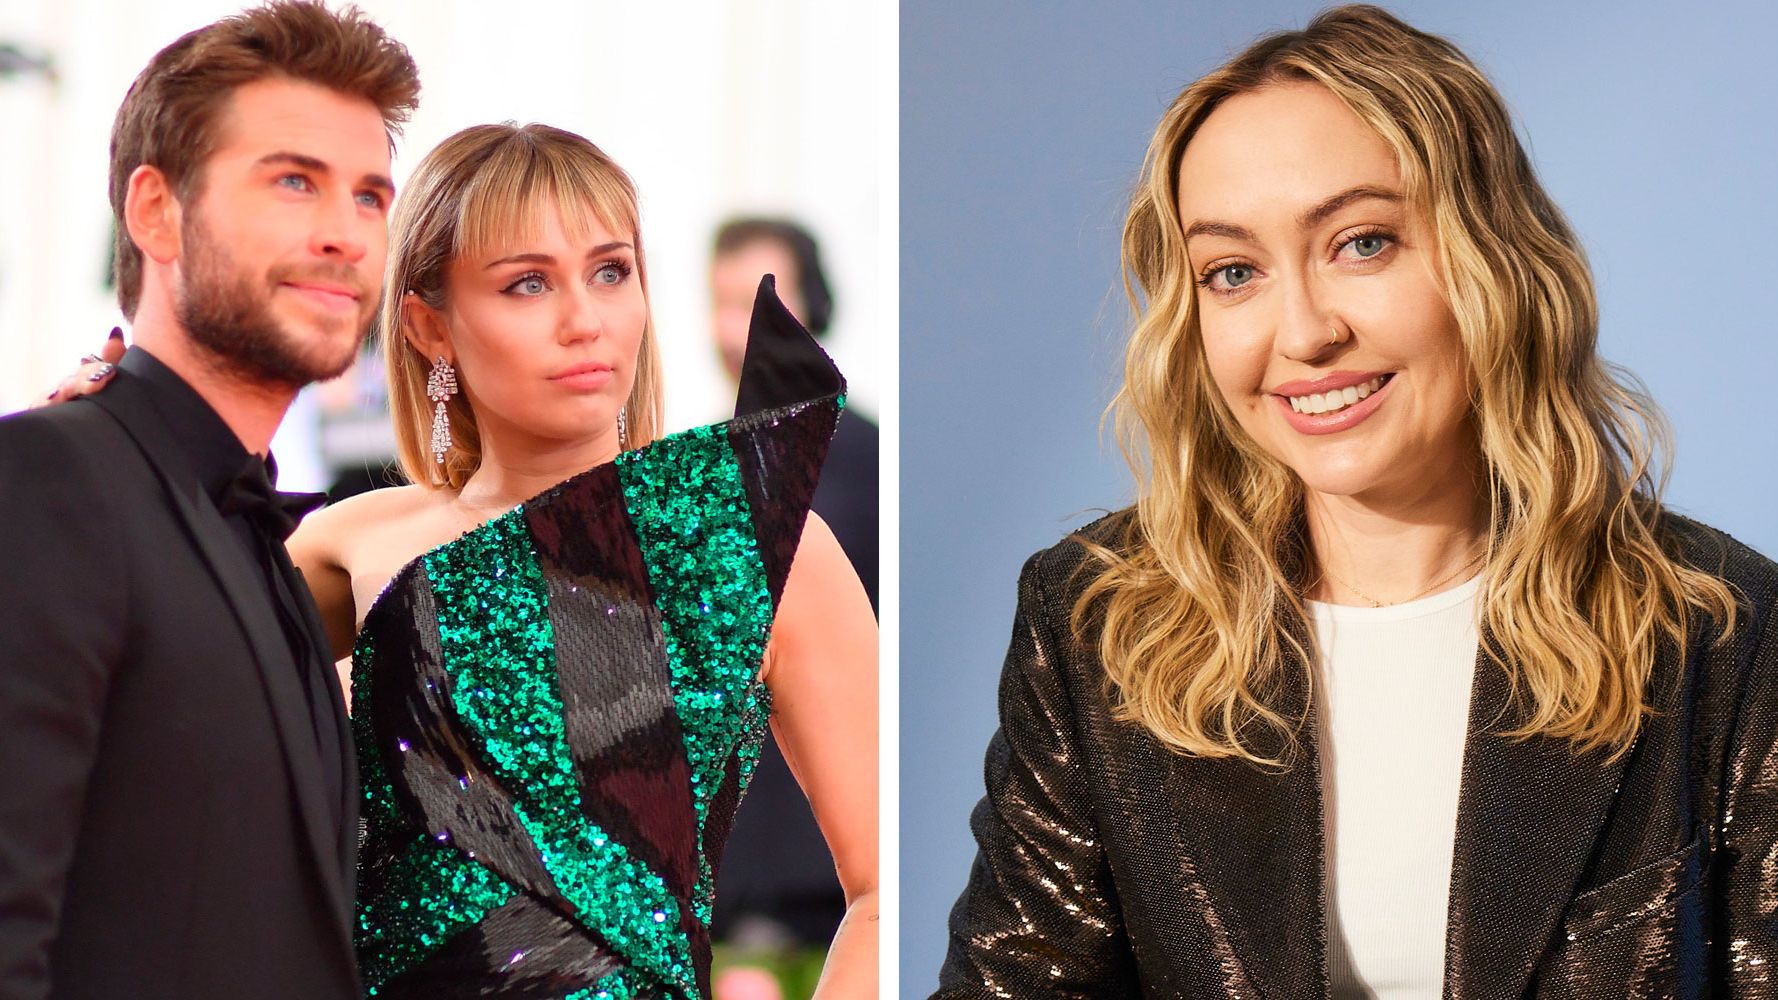 Miley Cyrus Bad Photo Sex - Miley Cyrus' Sister Brandi on 'Flowers' Being About Liam Hemsworth